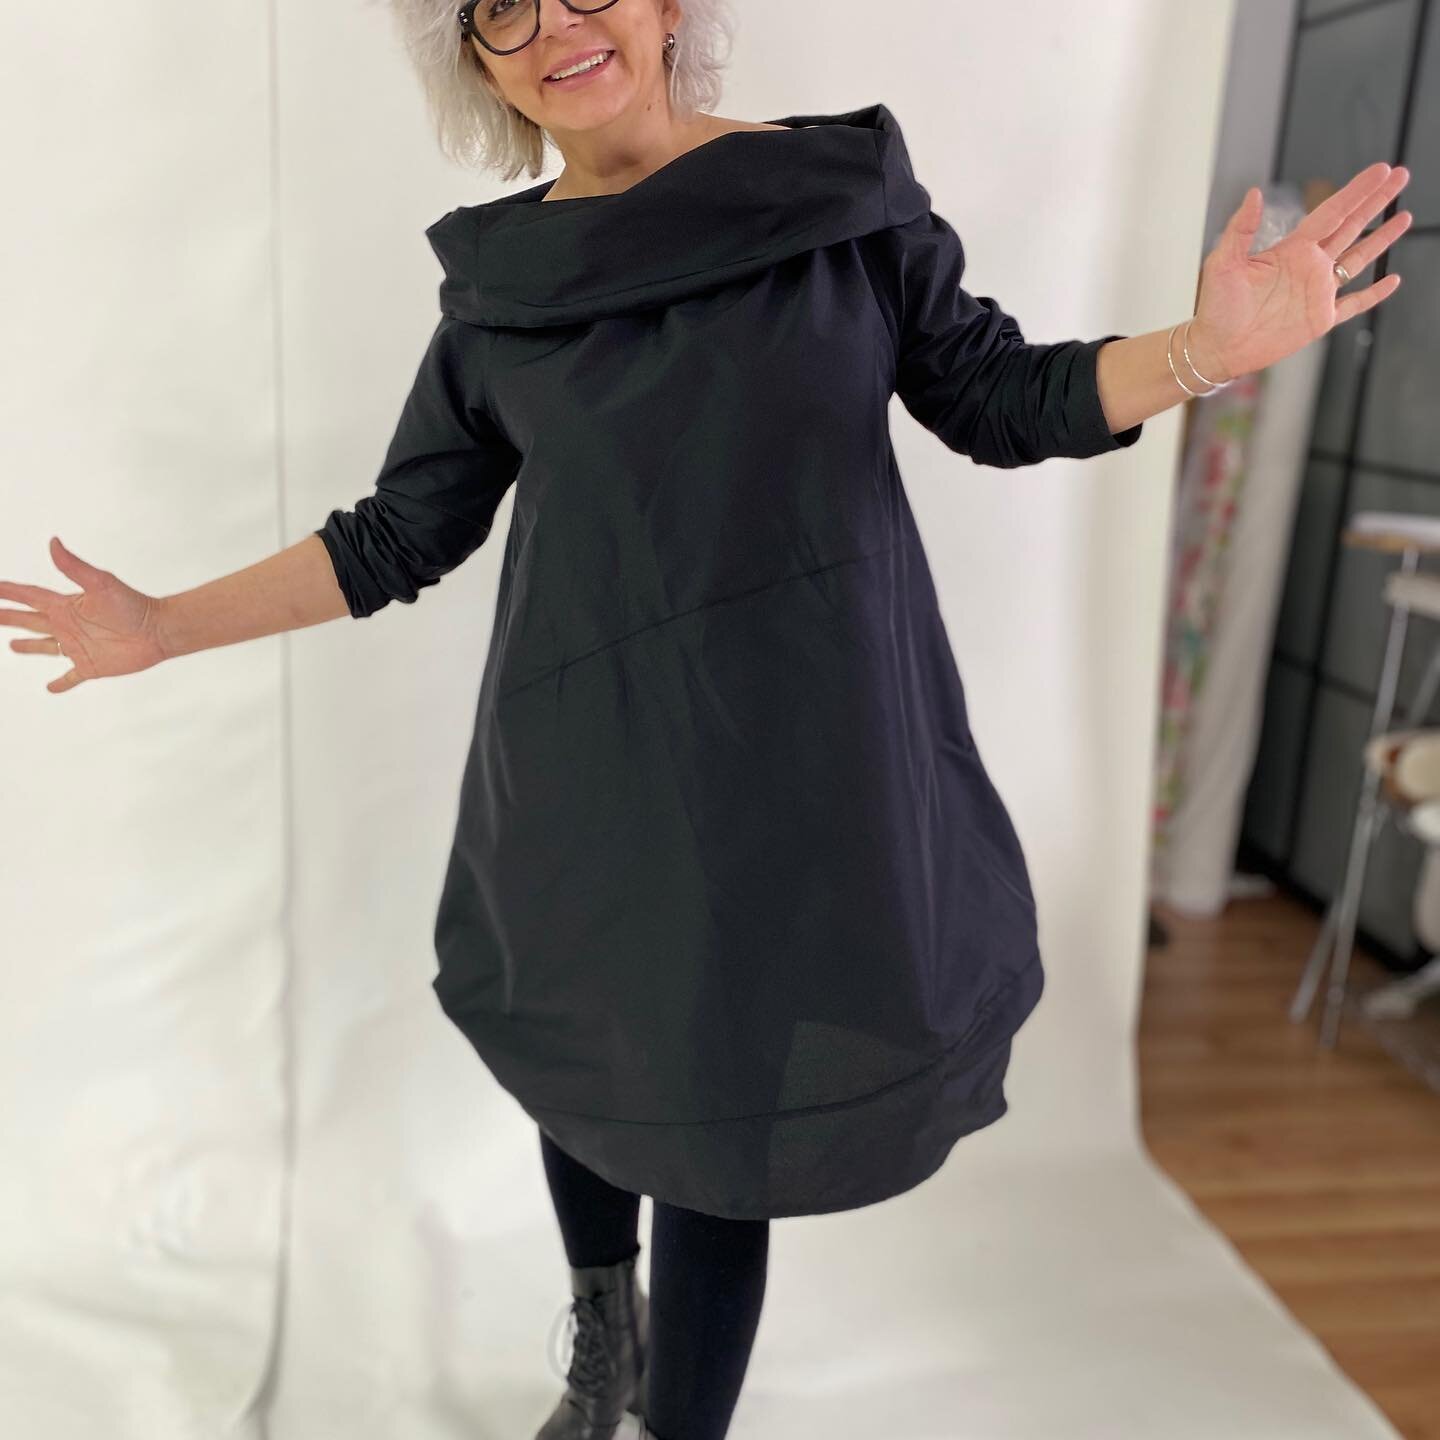 With or without belt this dress/tunic is so comfortable!Made out of  poly taffeta,so even when it wrinkles it&rsquo;s cool!
#modernwomen #littleblackdress #streetwearfashion #cooldress #fashionoverfifty #limitededition #leathebelt #urbanfashion #made